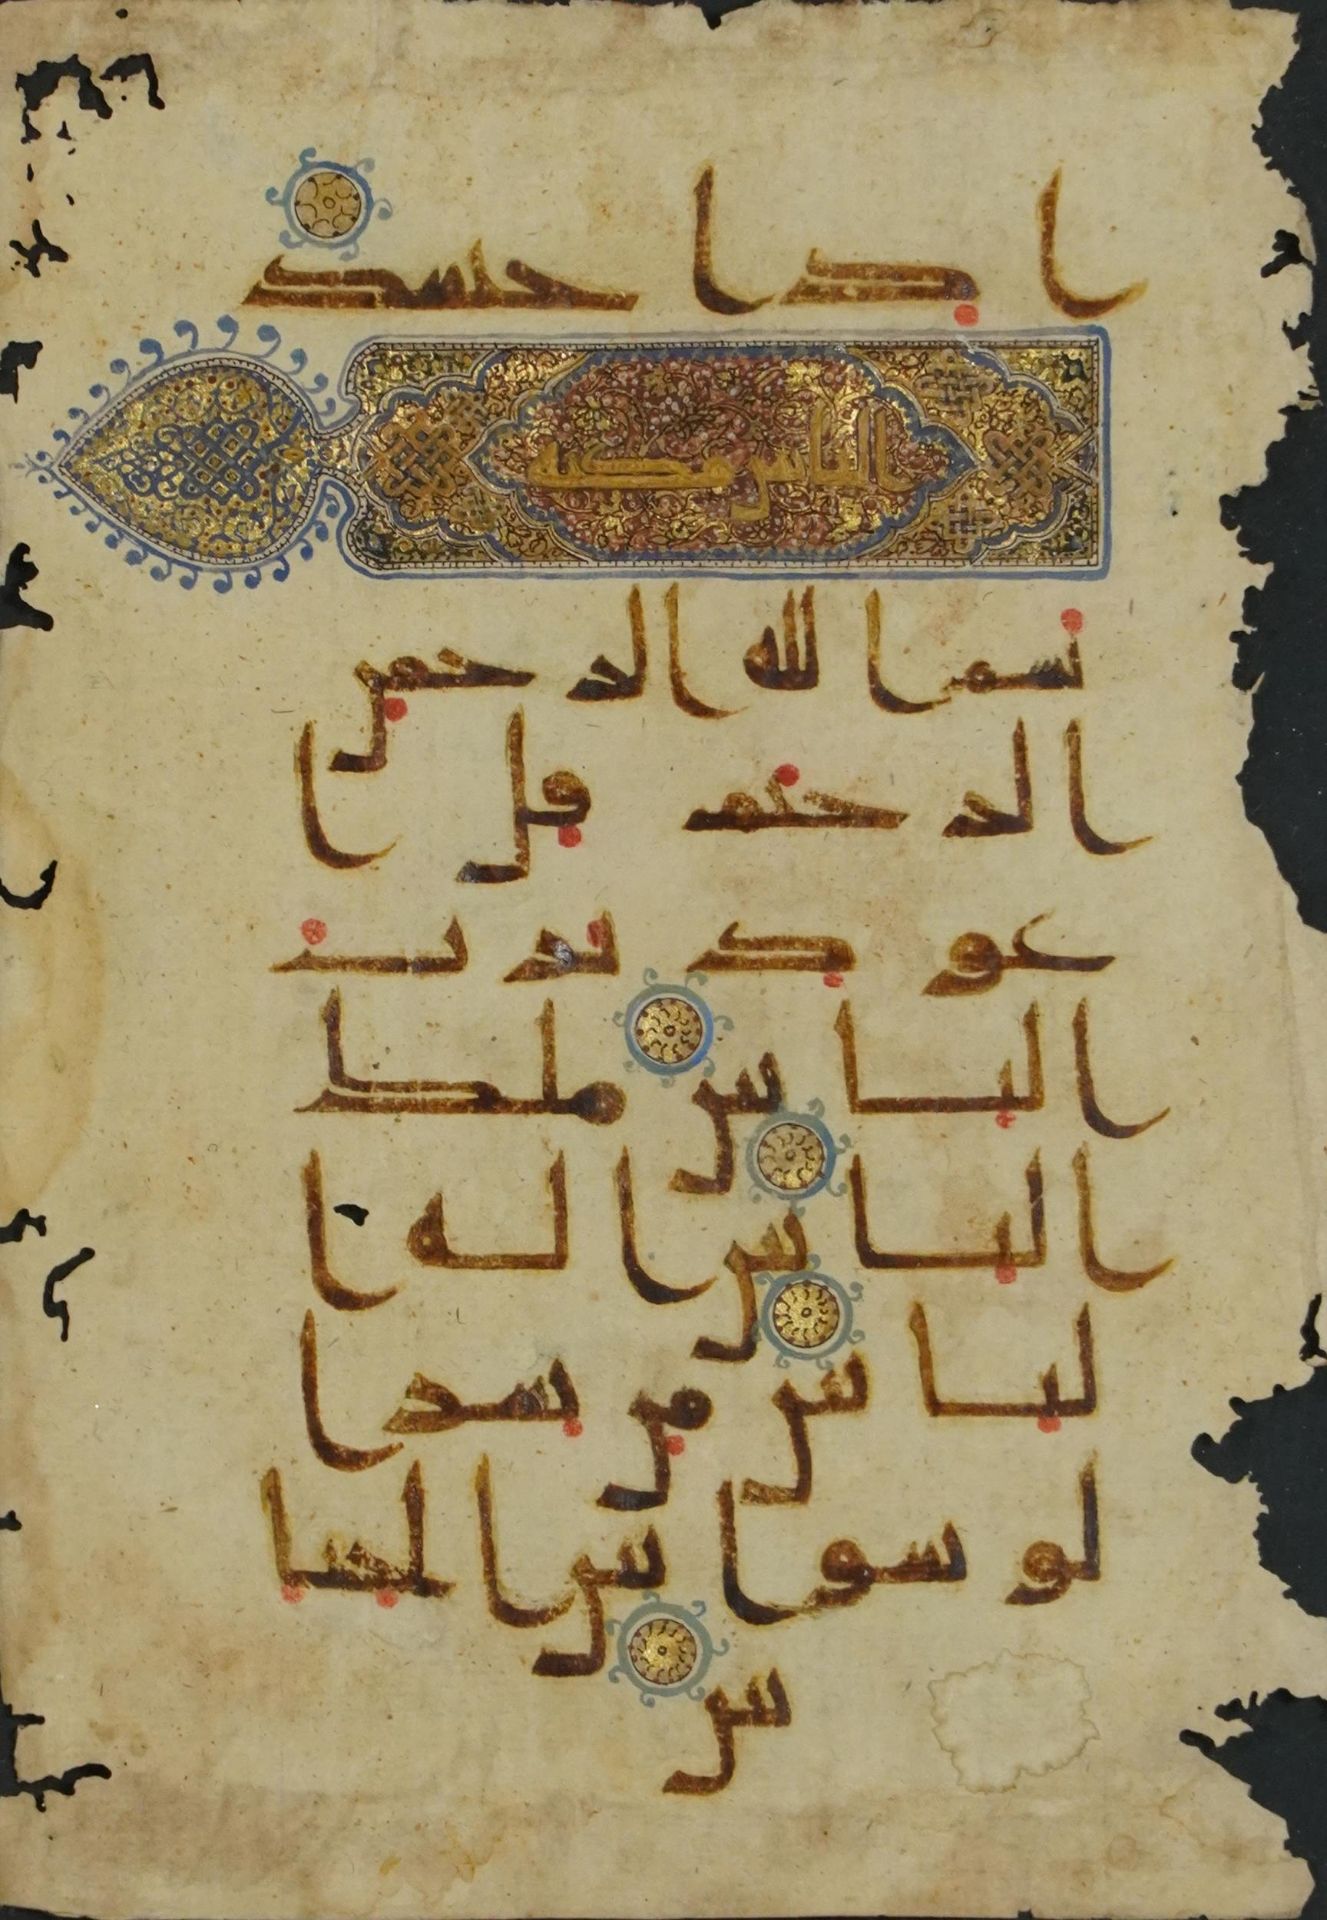 Antique Islamic illuminated Quran page hand painted with calligraphy, mounted, framed and glazed,